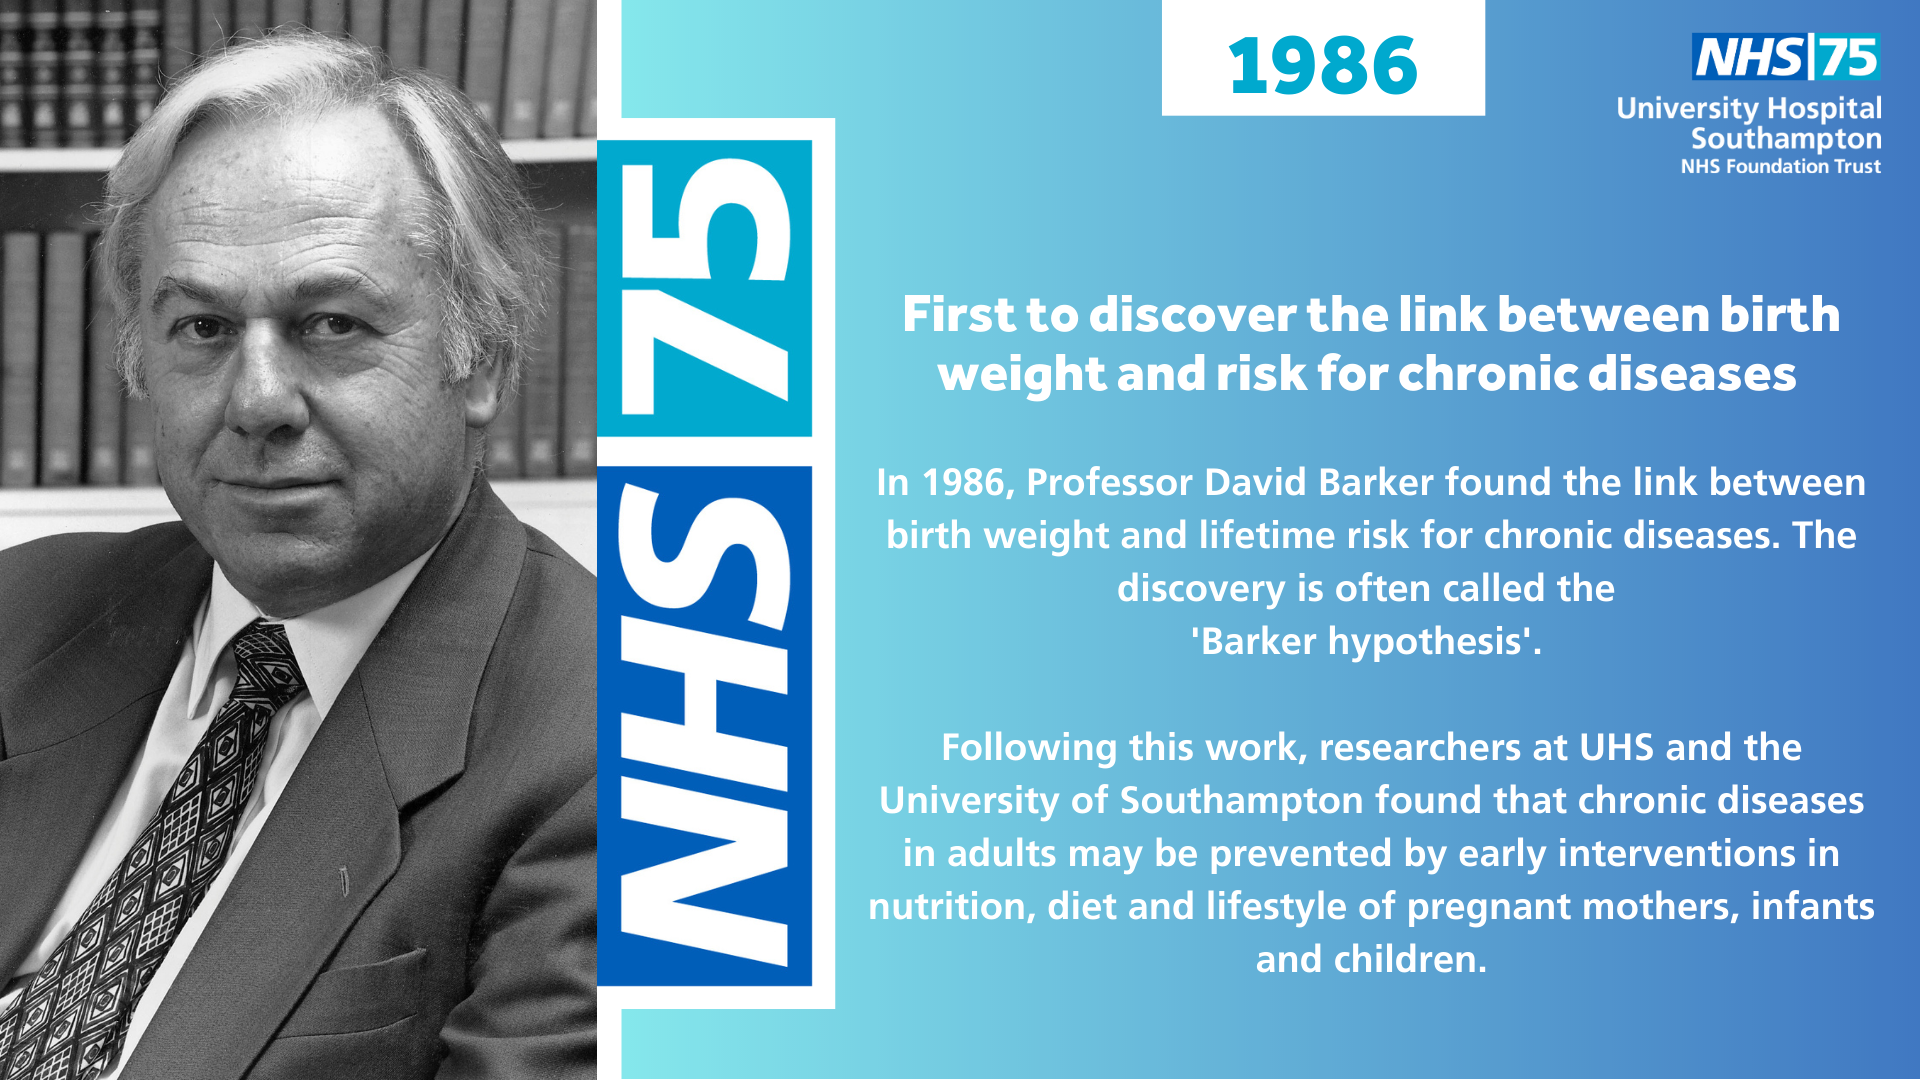 First to discover the link between birth weight and chronic diseases